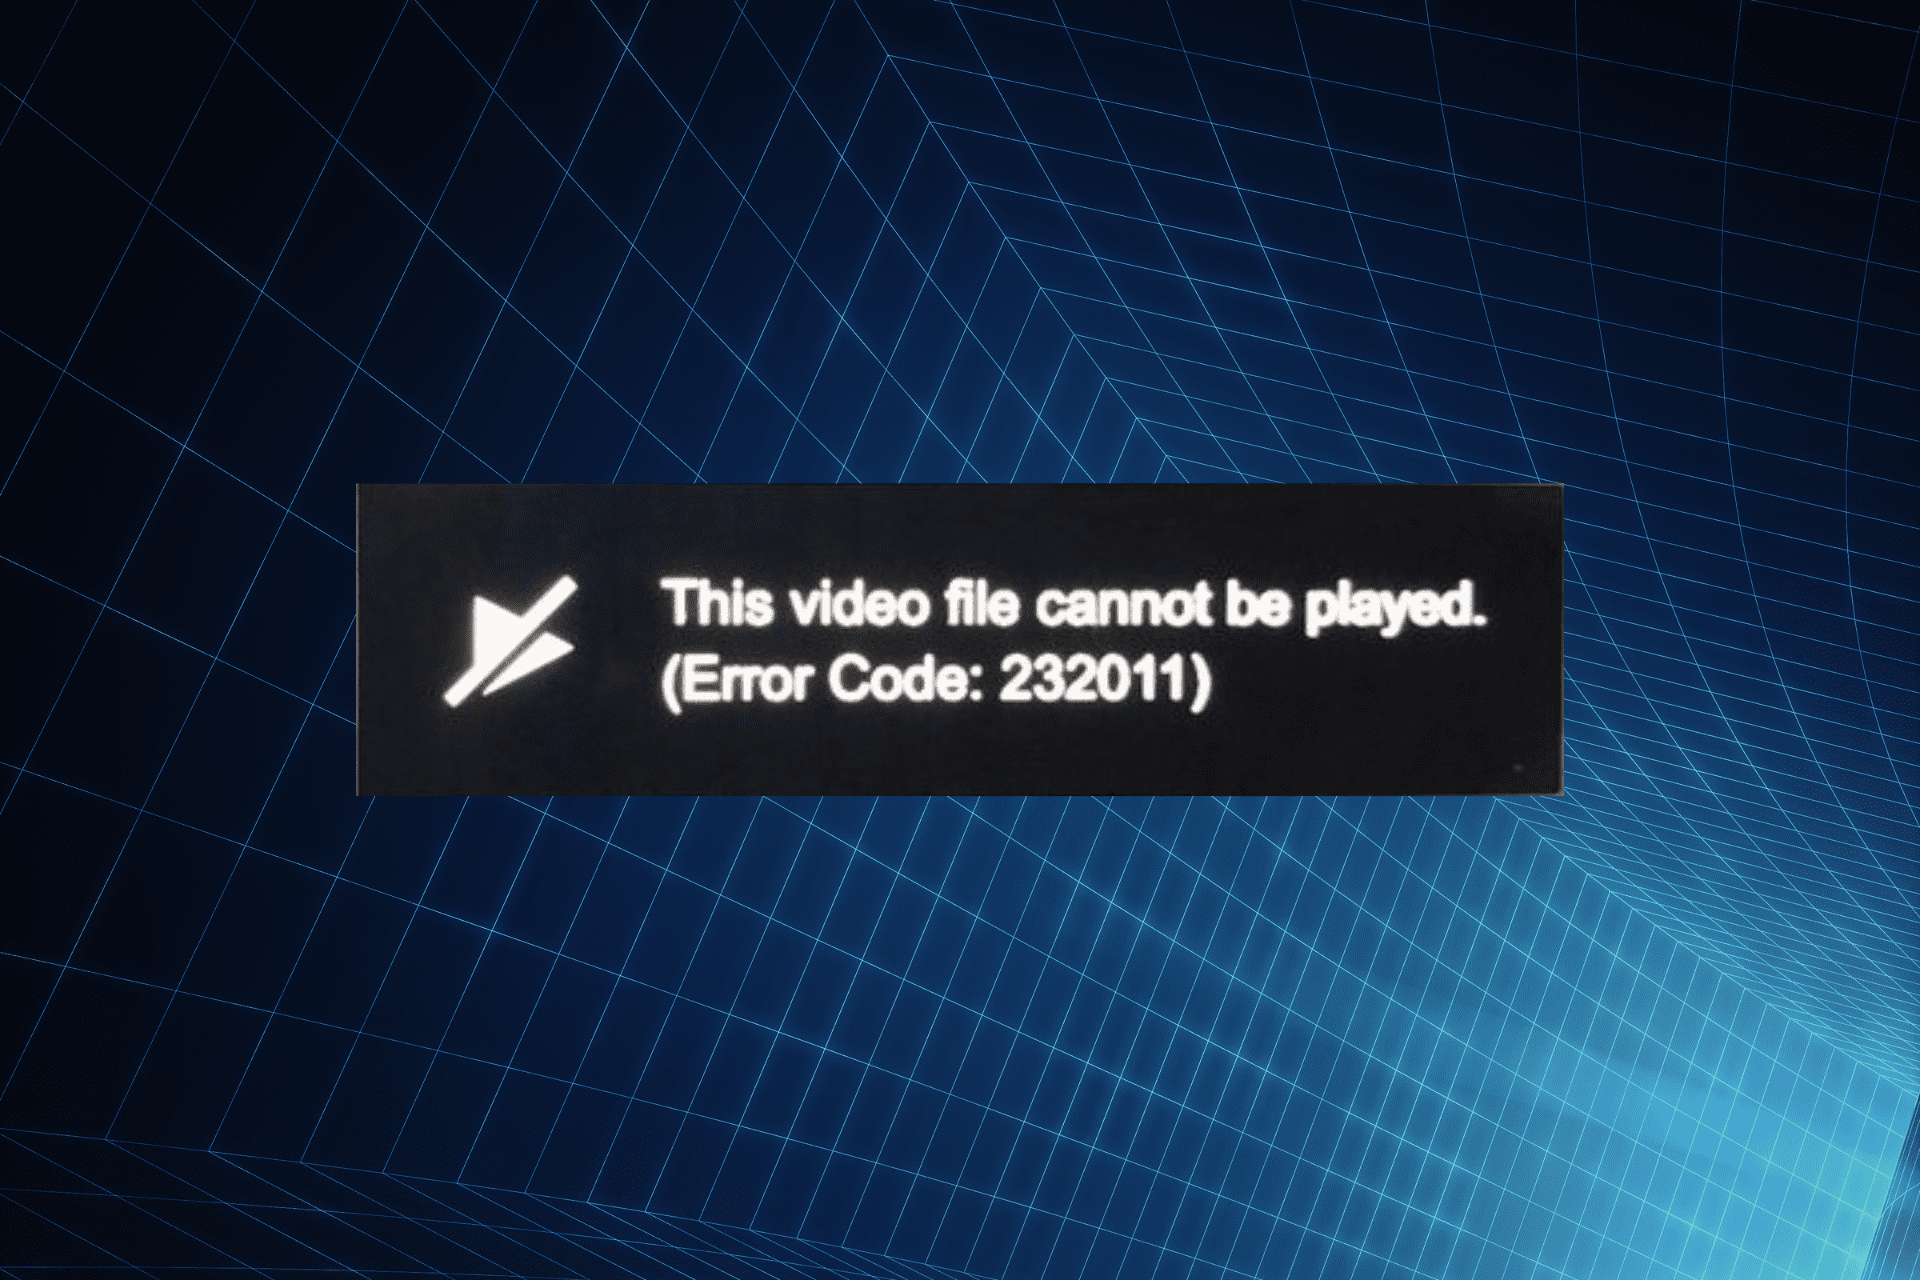 Fix this video file cannot be played. (error code 232011)